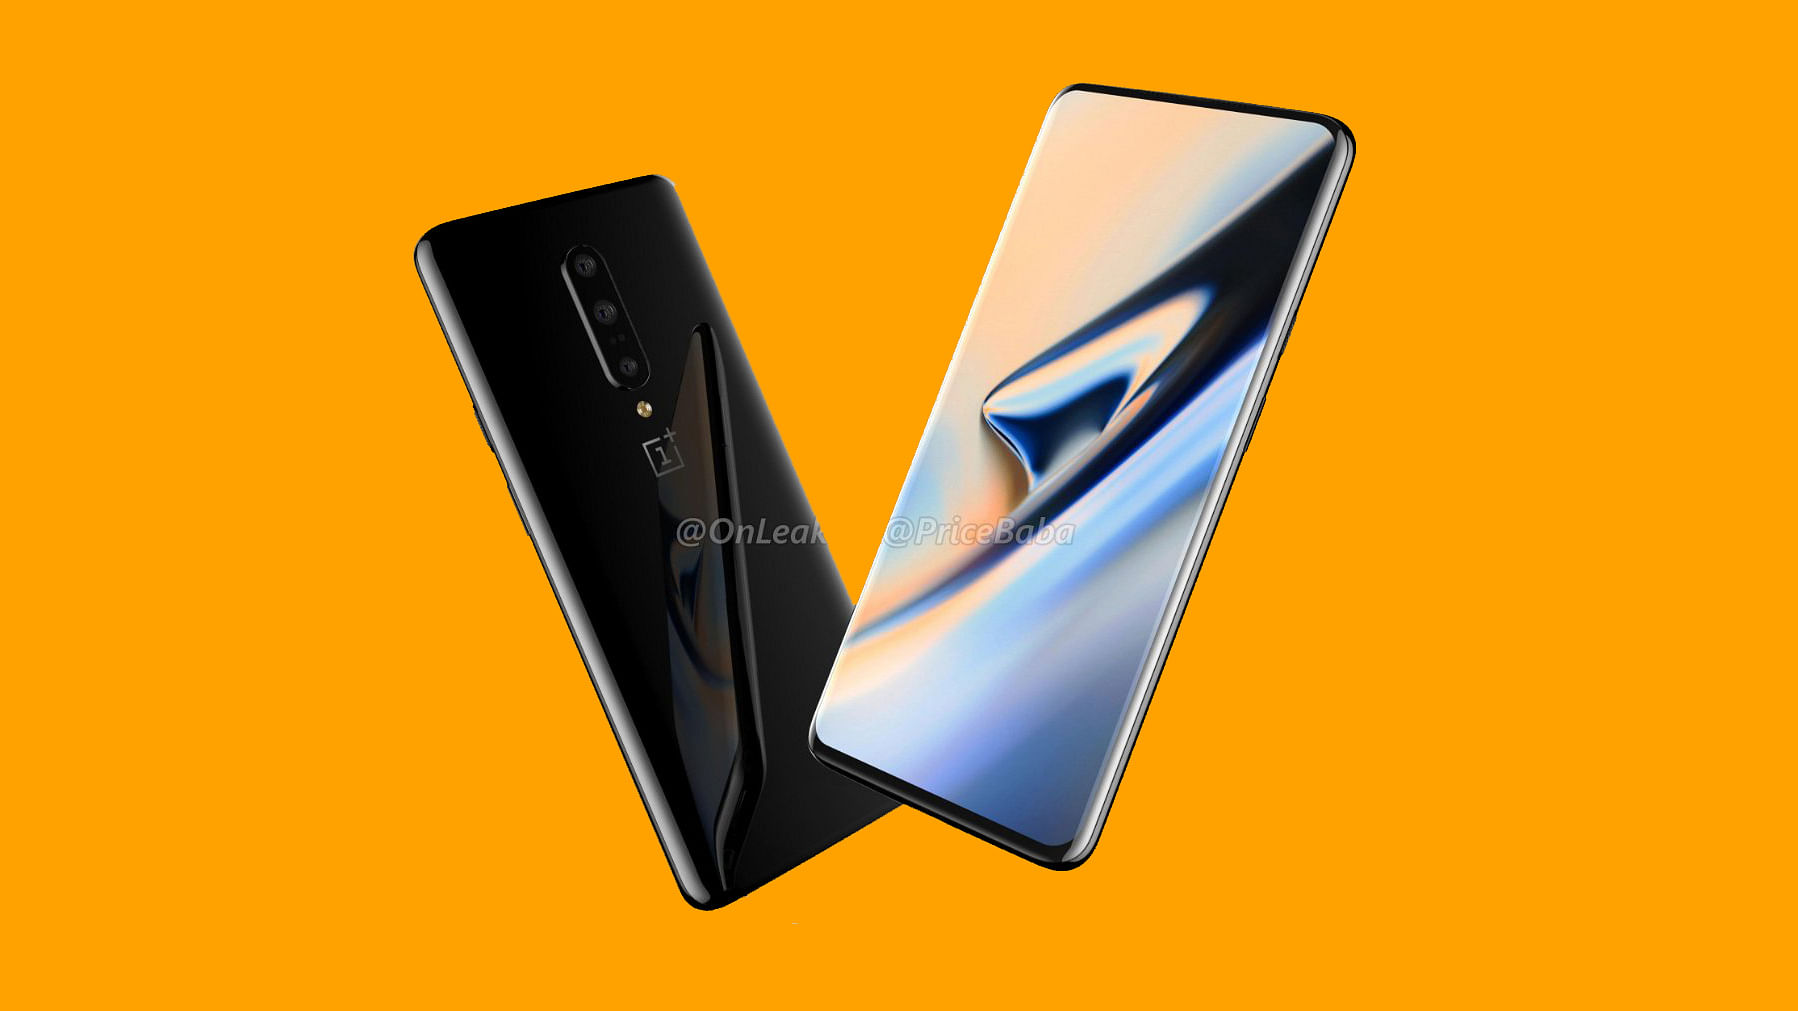 Is this a first look at the OnePlus 7?